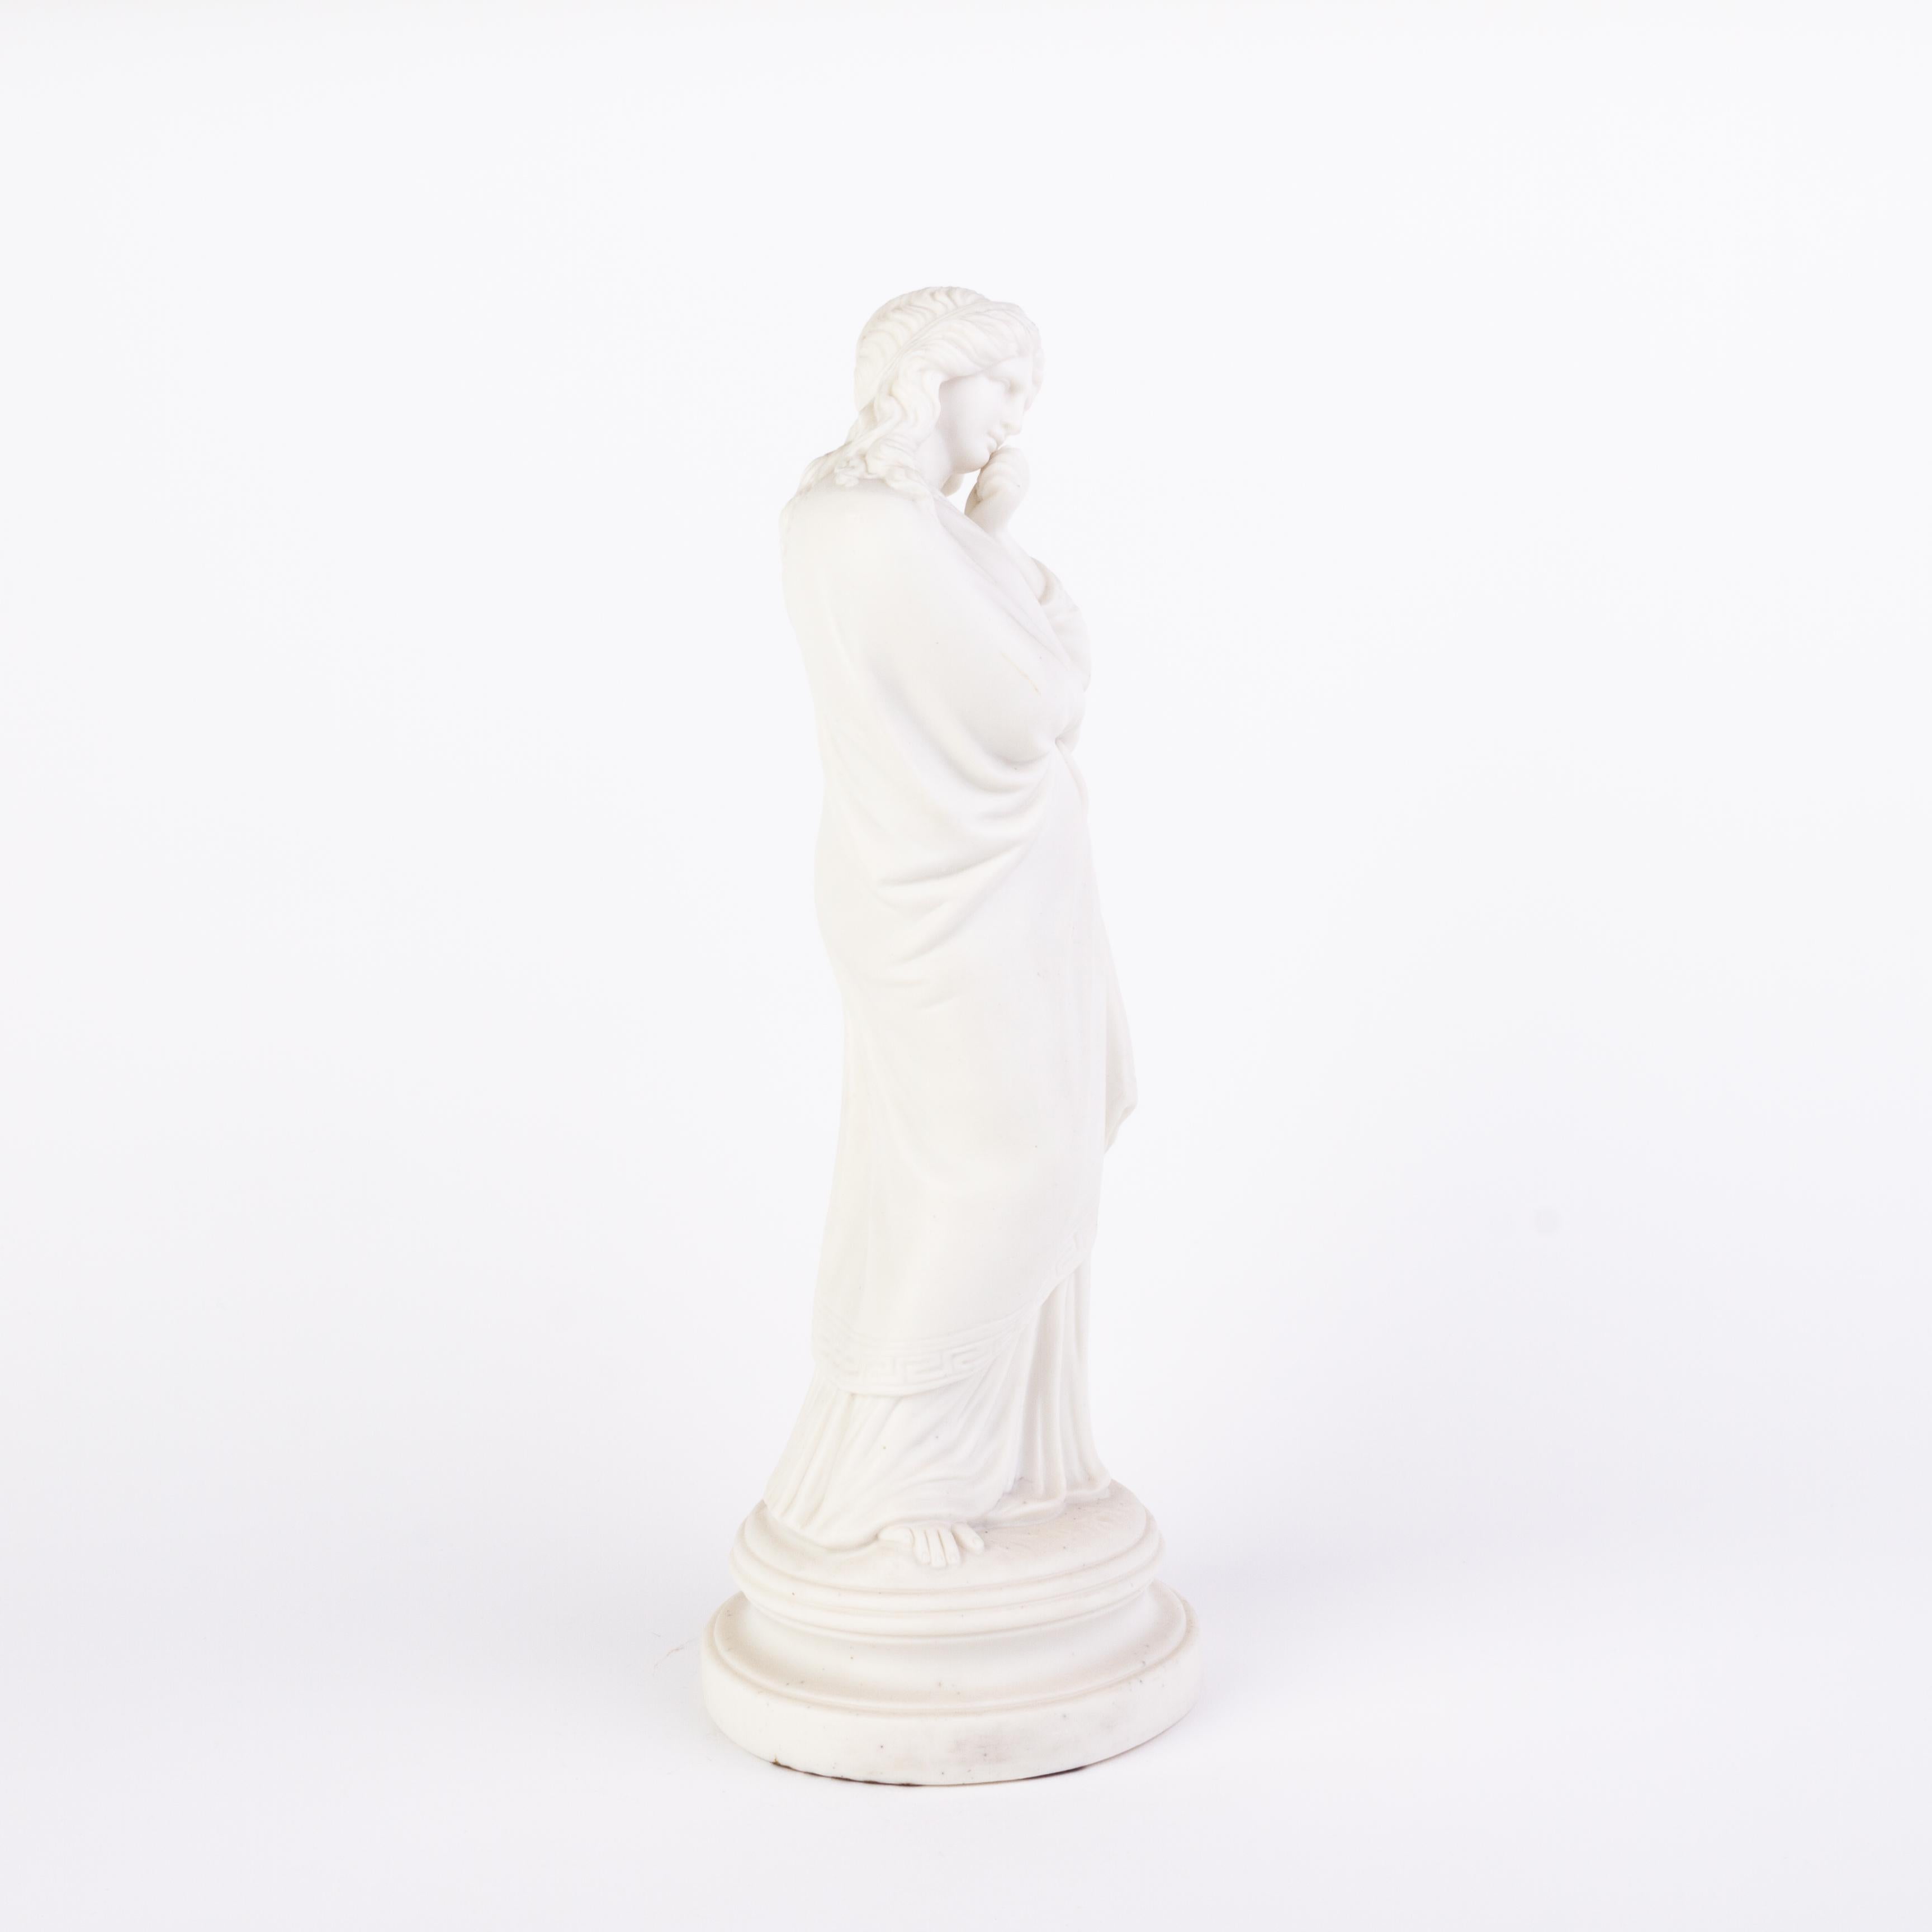 English Victorian Copeland Parian Ware Statue Muse of Comedy 19th Century
Good condition
From a private collection.
Free international shipping.